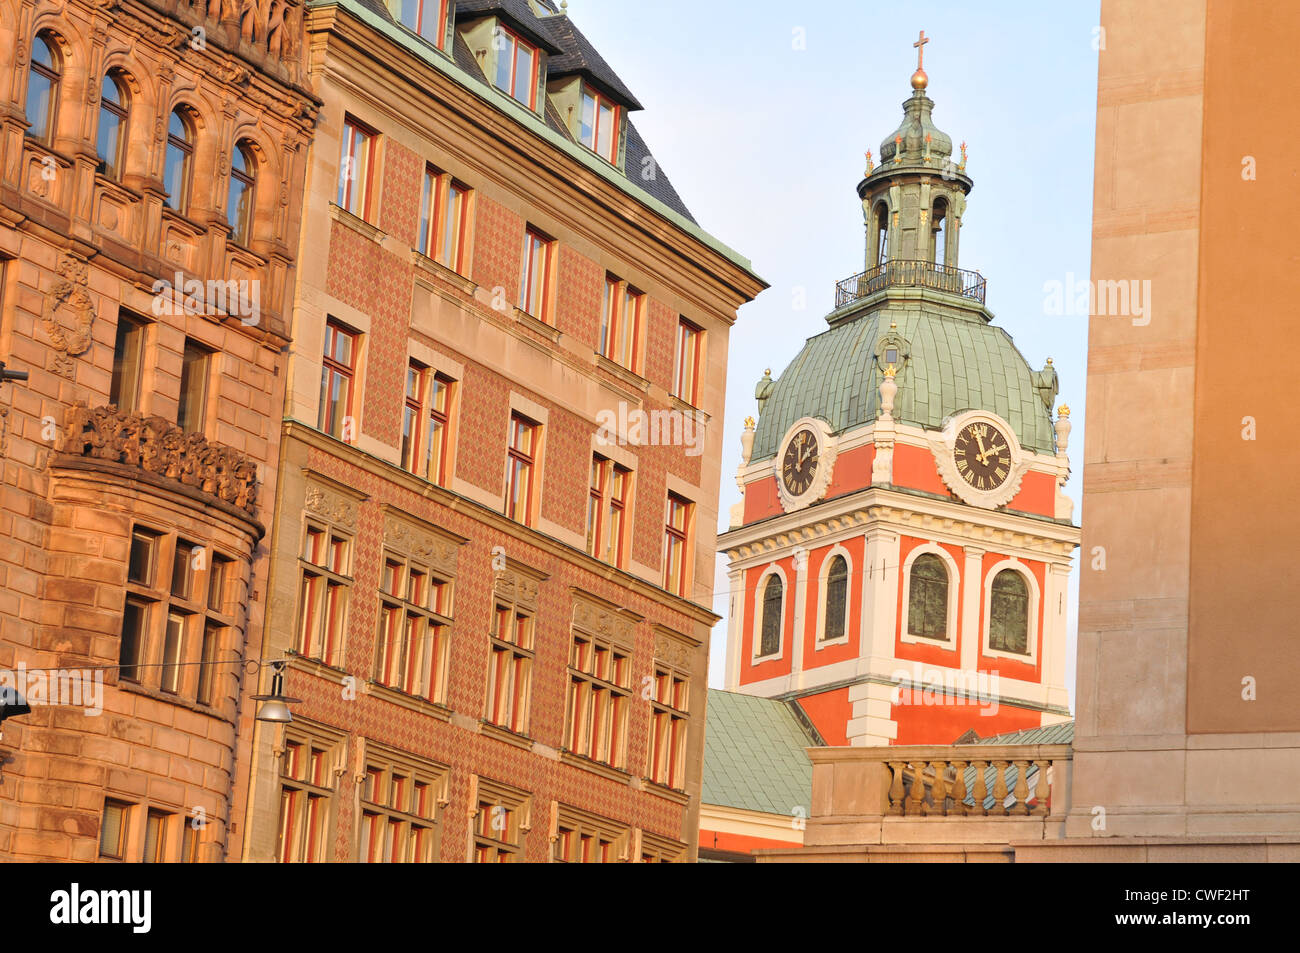 Architectural detail of St. Jacobs church in Stockholm, Sweden Stock Photo